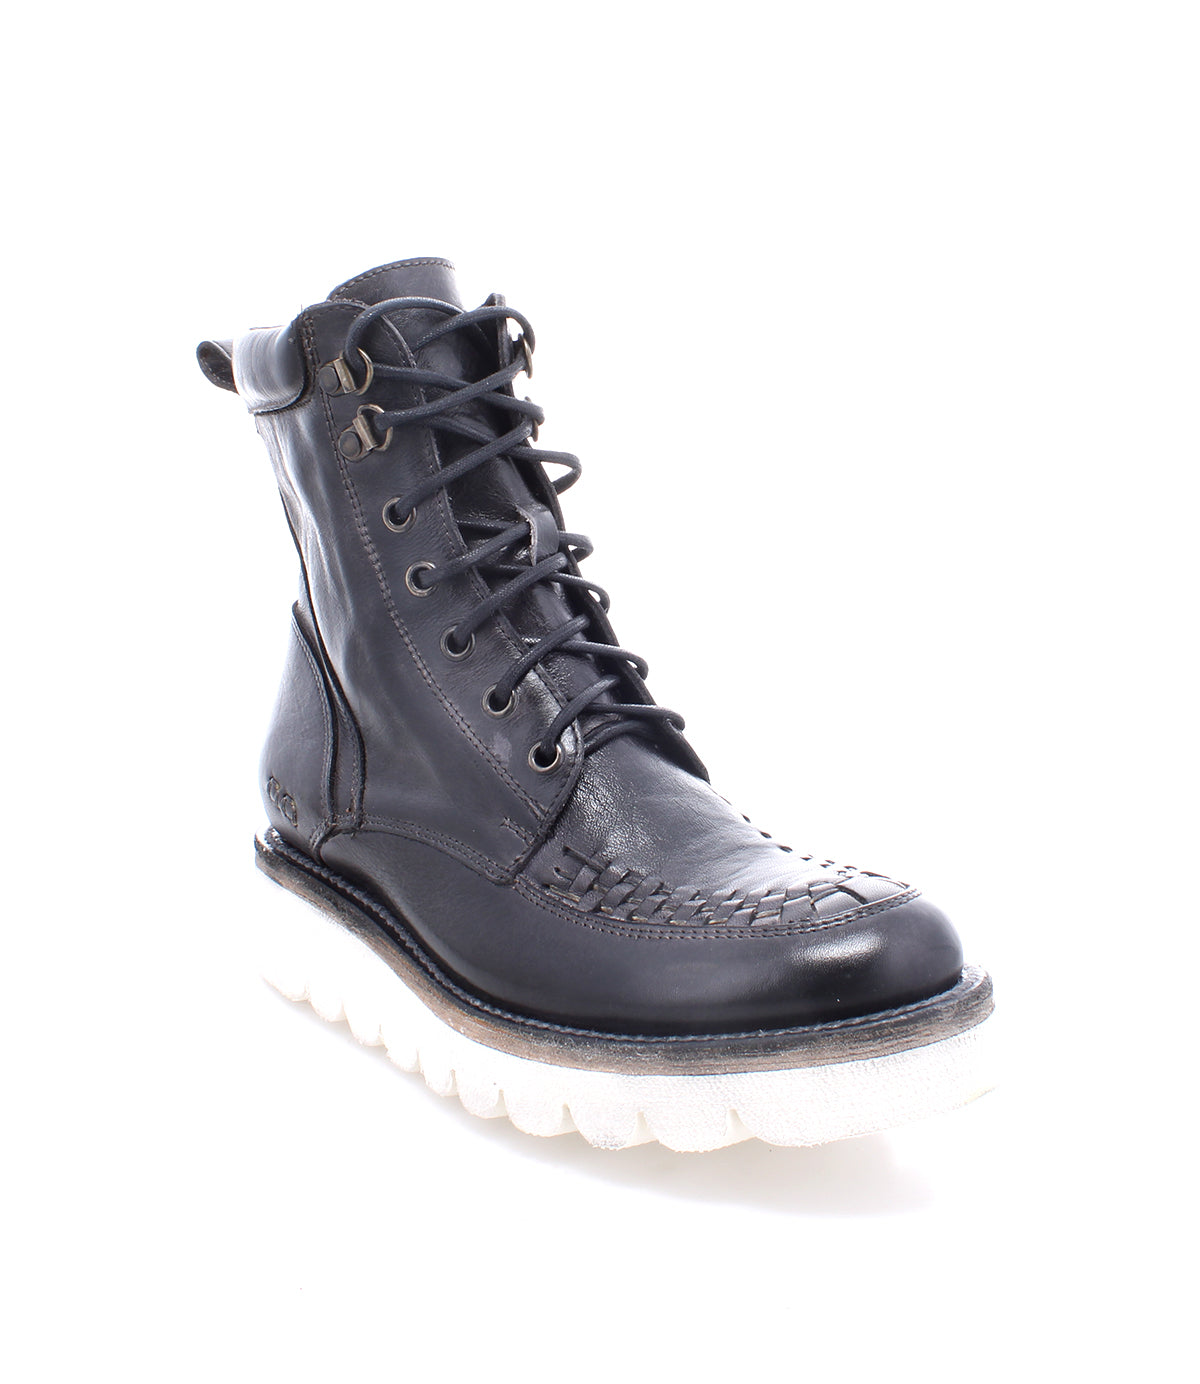 A black leather boot with a white sole, the Elisha II by Bed Stu.